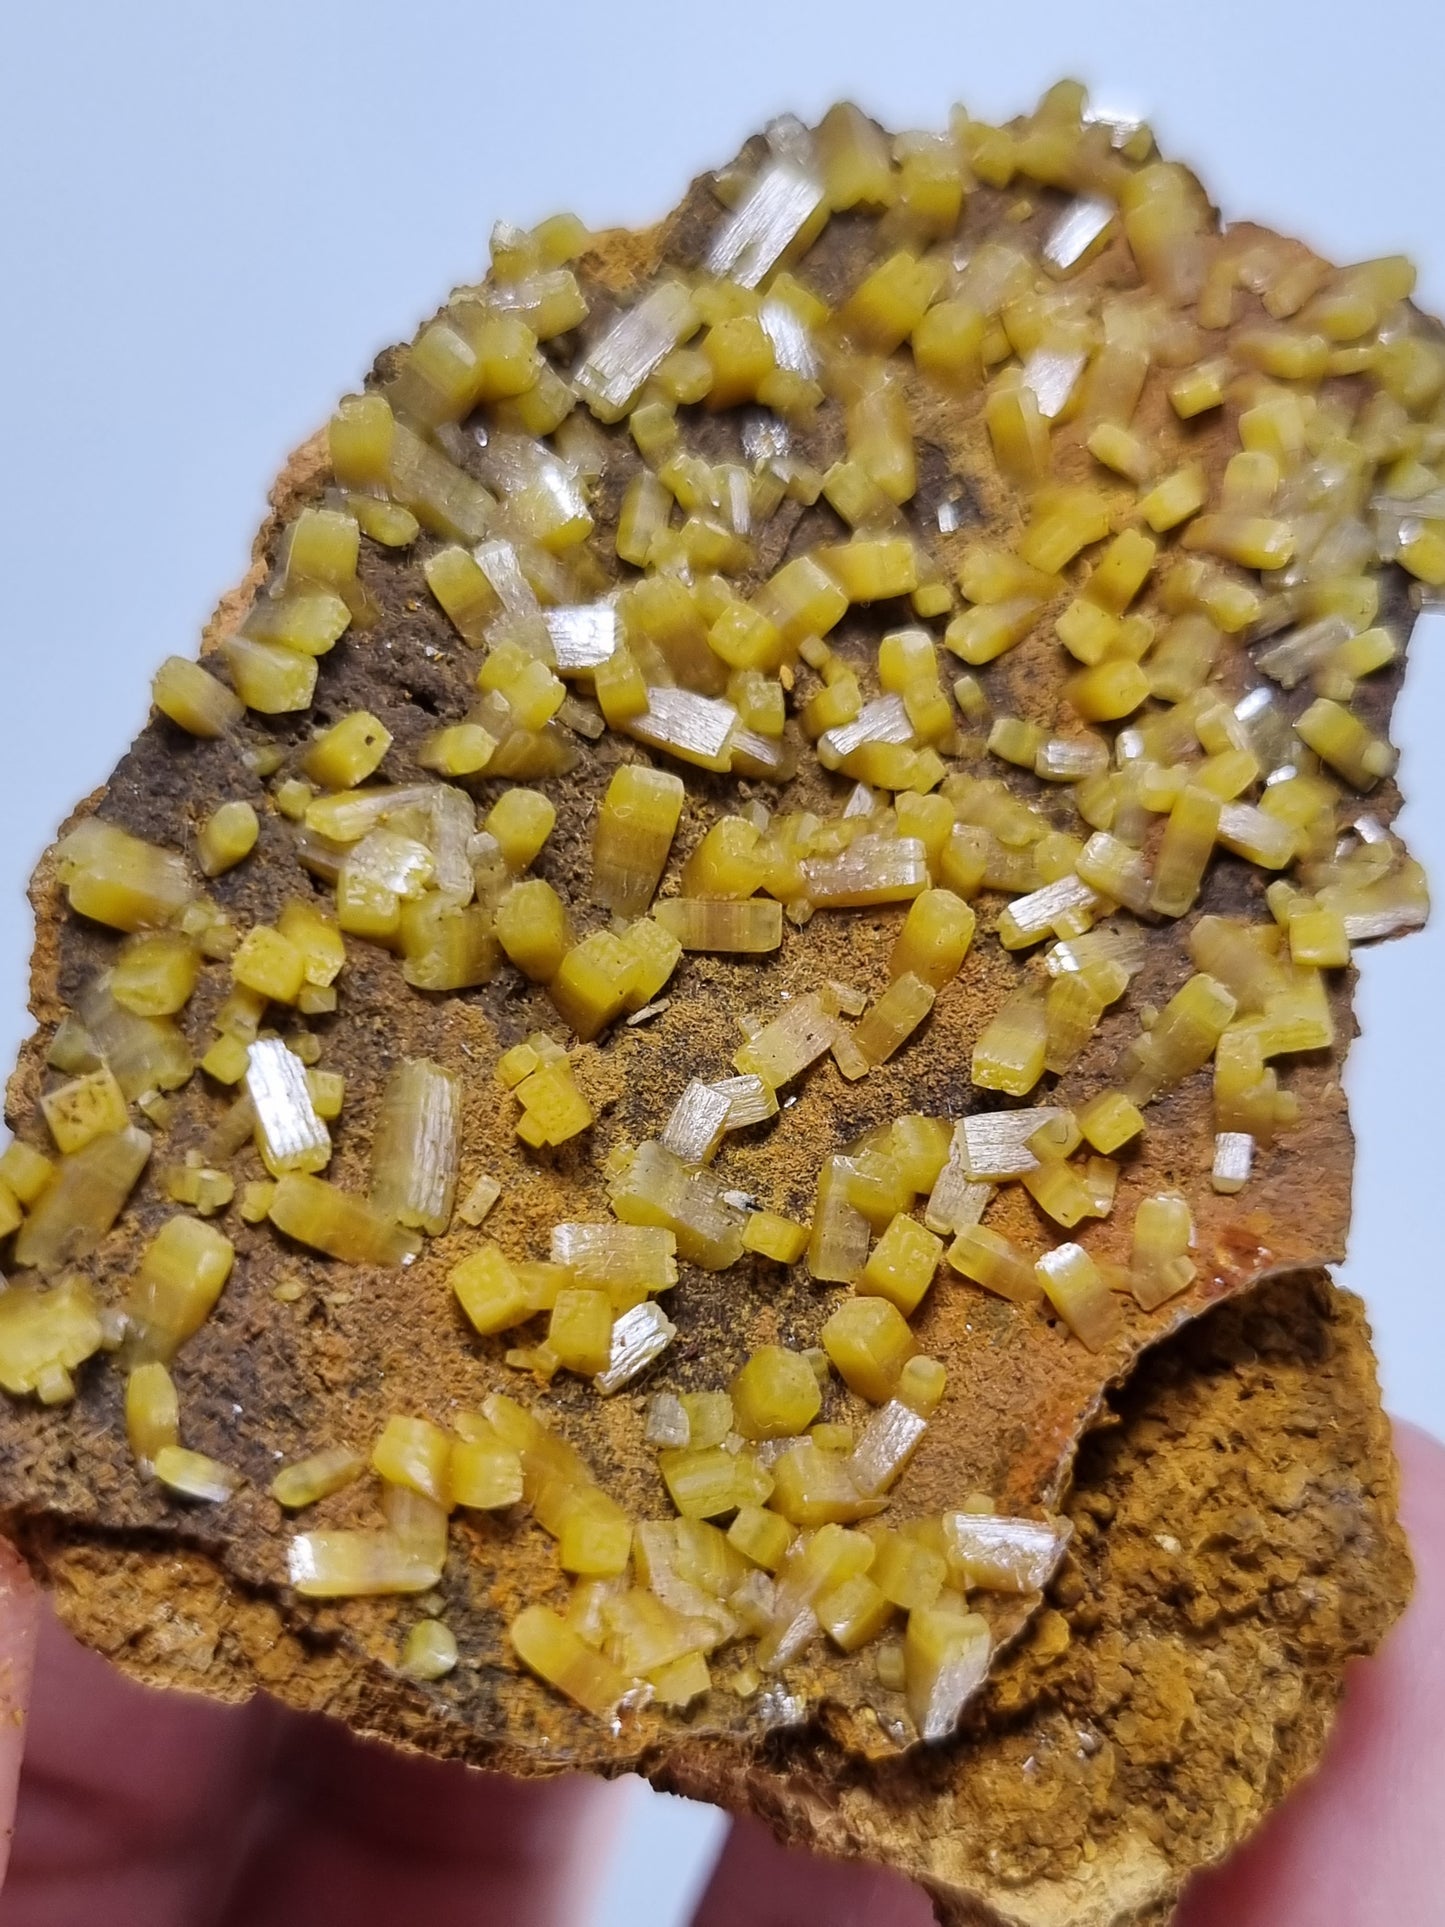 Beautiful Mimetite Crystal Specimen from Mexico